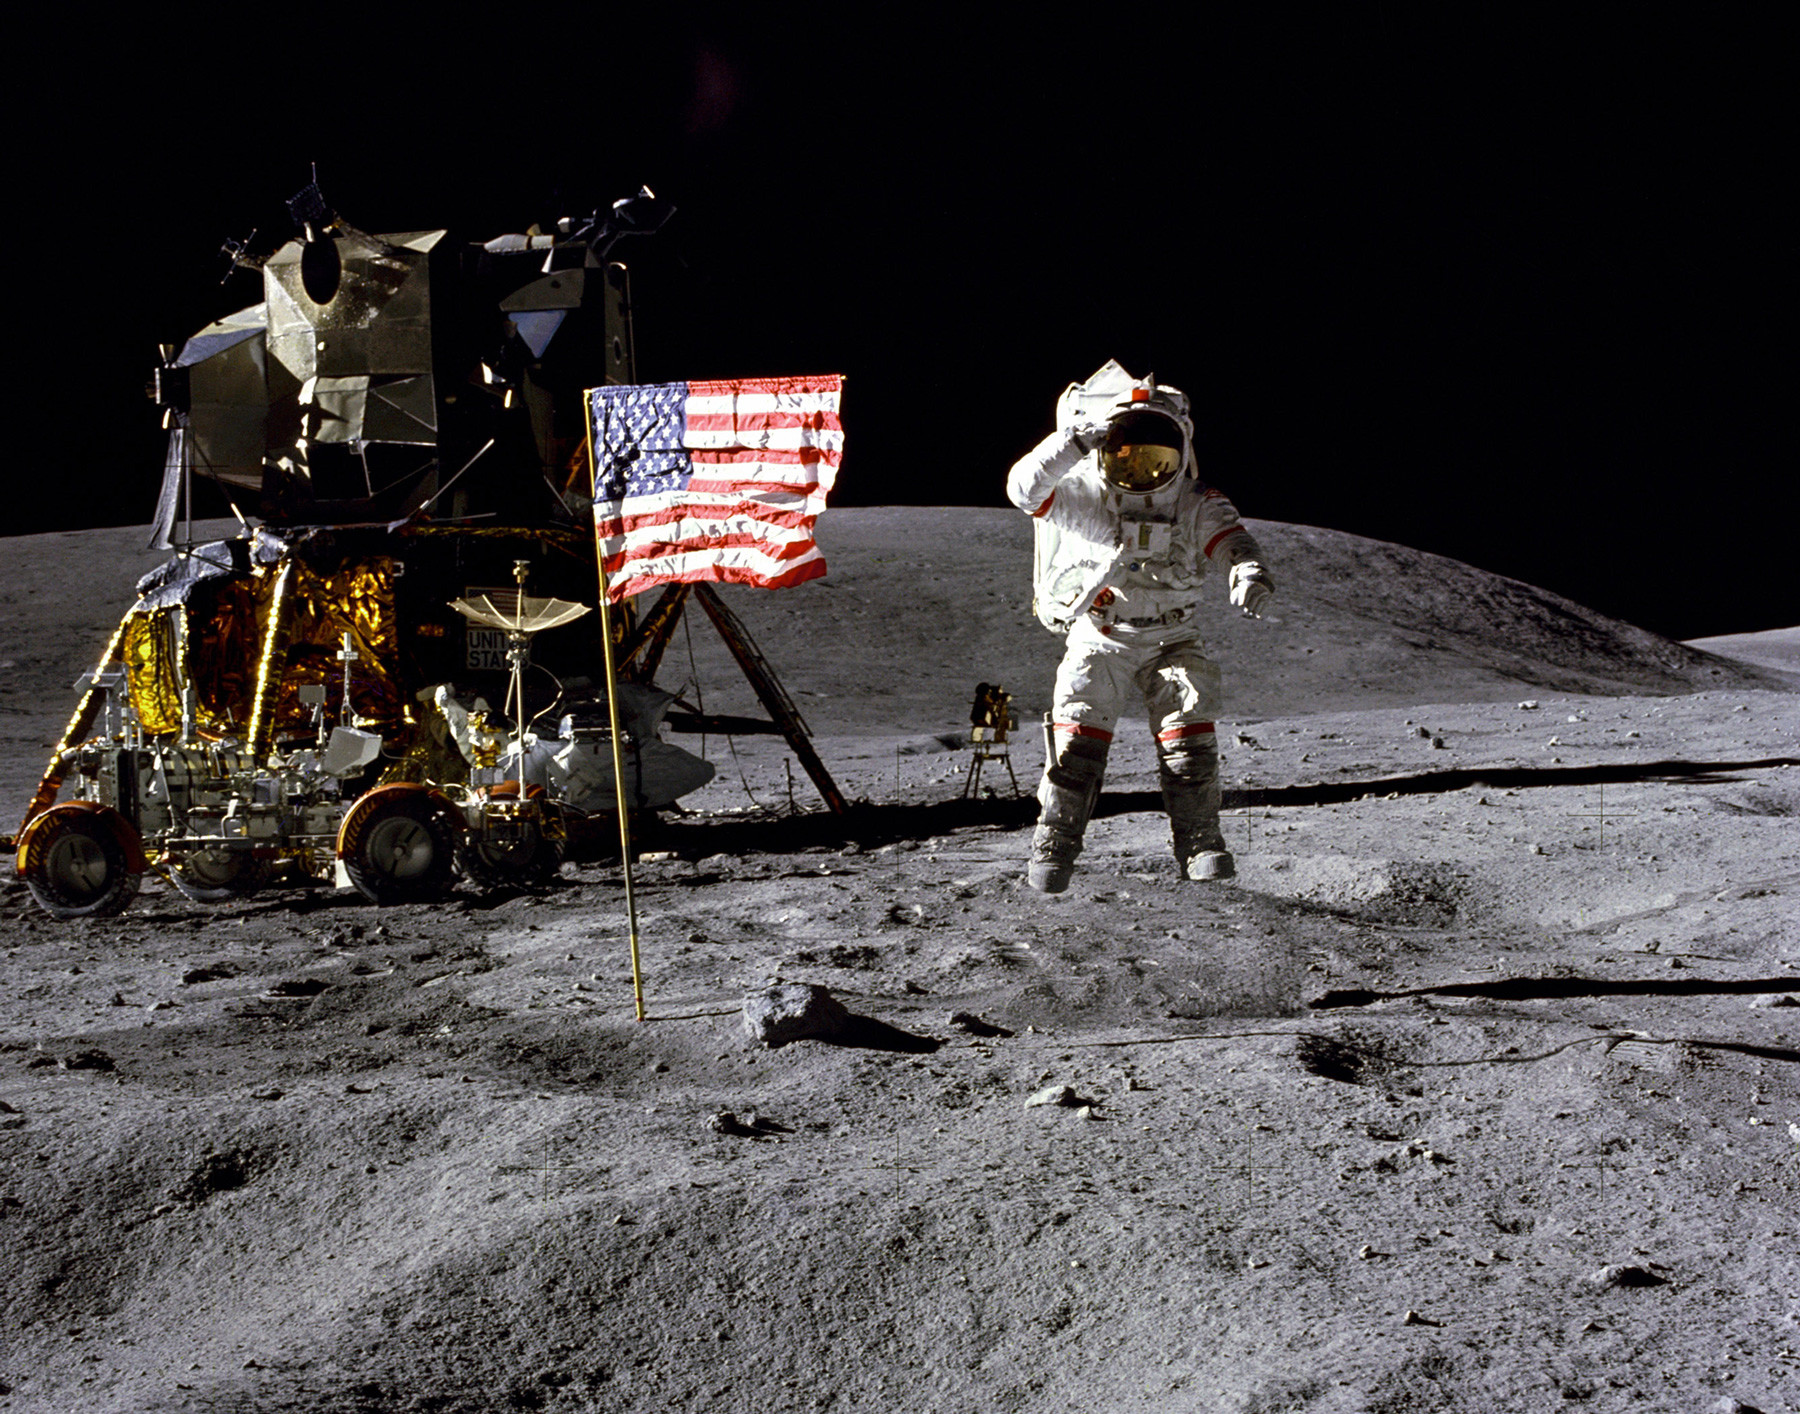 Astronaut John Young, lunar module pilot, walks on the surface of the Moon near the leg of the Lunar Module (LM) 'Eagle' during the Apollo 11 exravehicular activity.